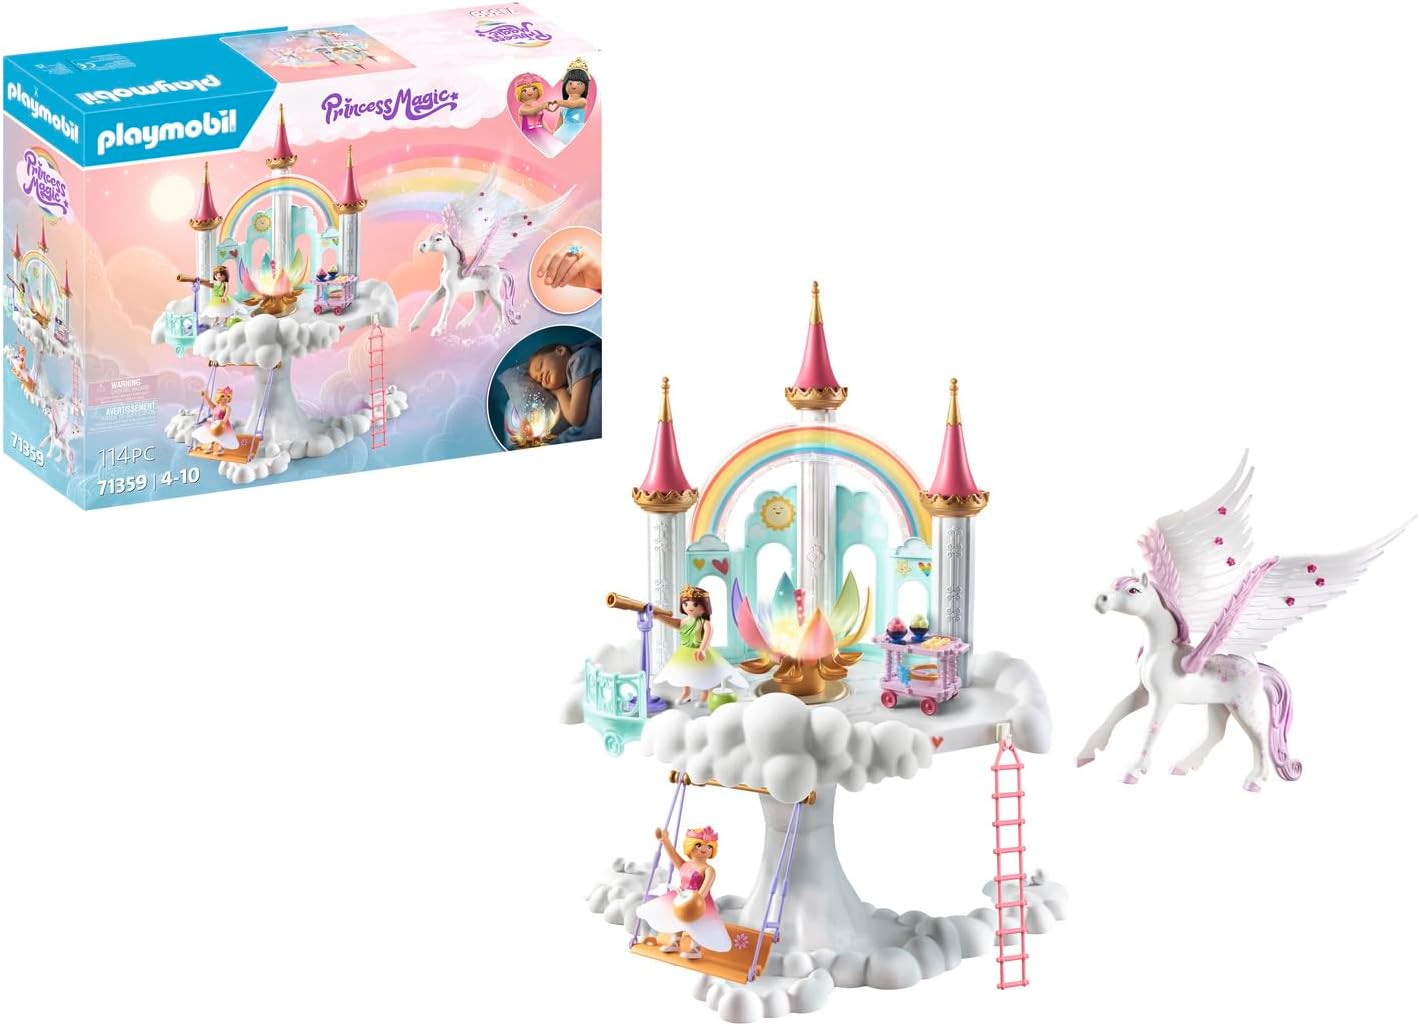 PLAYMOBIL Princess Magic 71359 Heavenly Rainbow Castle, Magic World with Luminous Rainbow Flower, Butterfly Ring, Pegas and Princesses, Age 4+